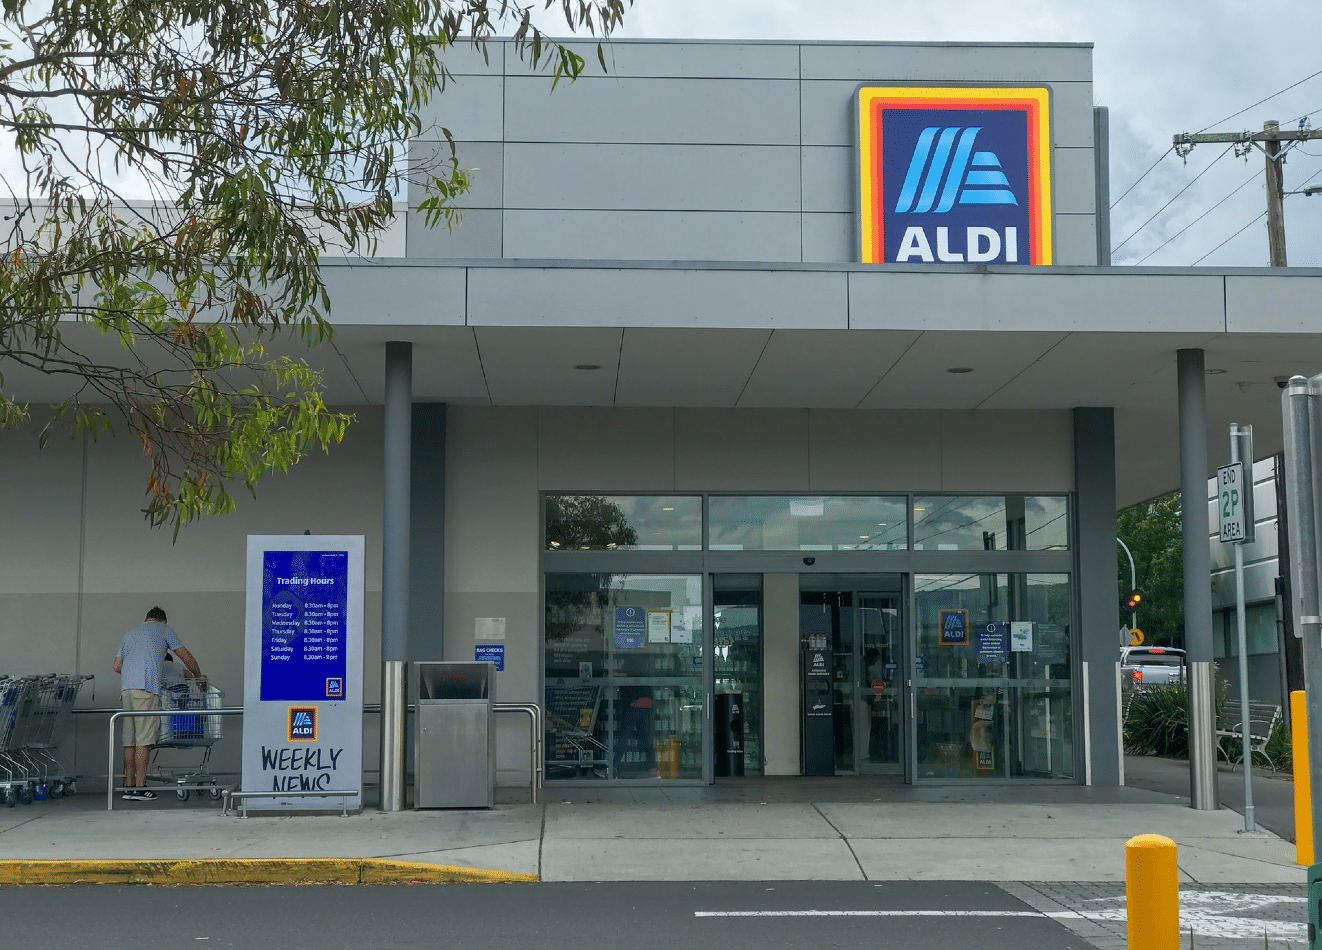 Along with other retailers, Aldi's plans to open new retail stores in 2021.